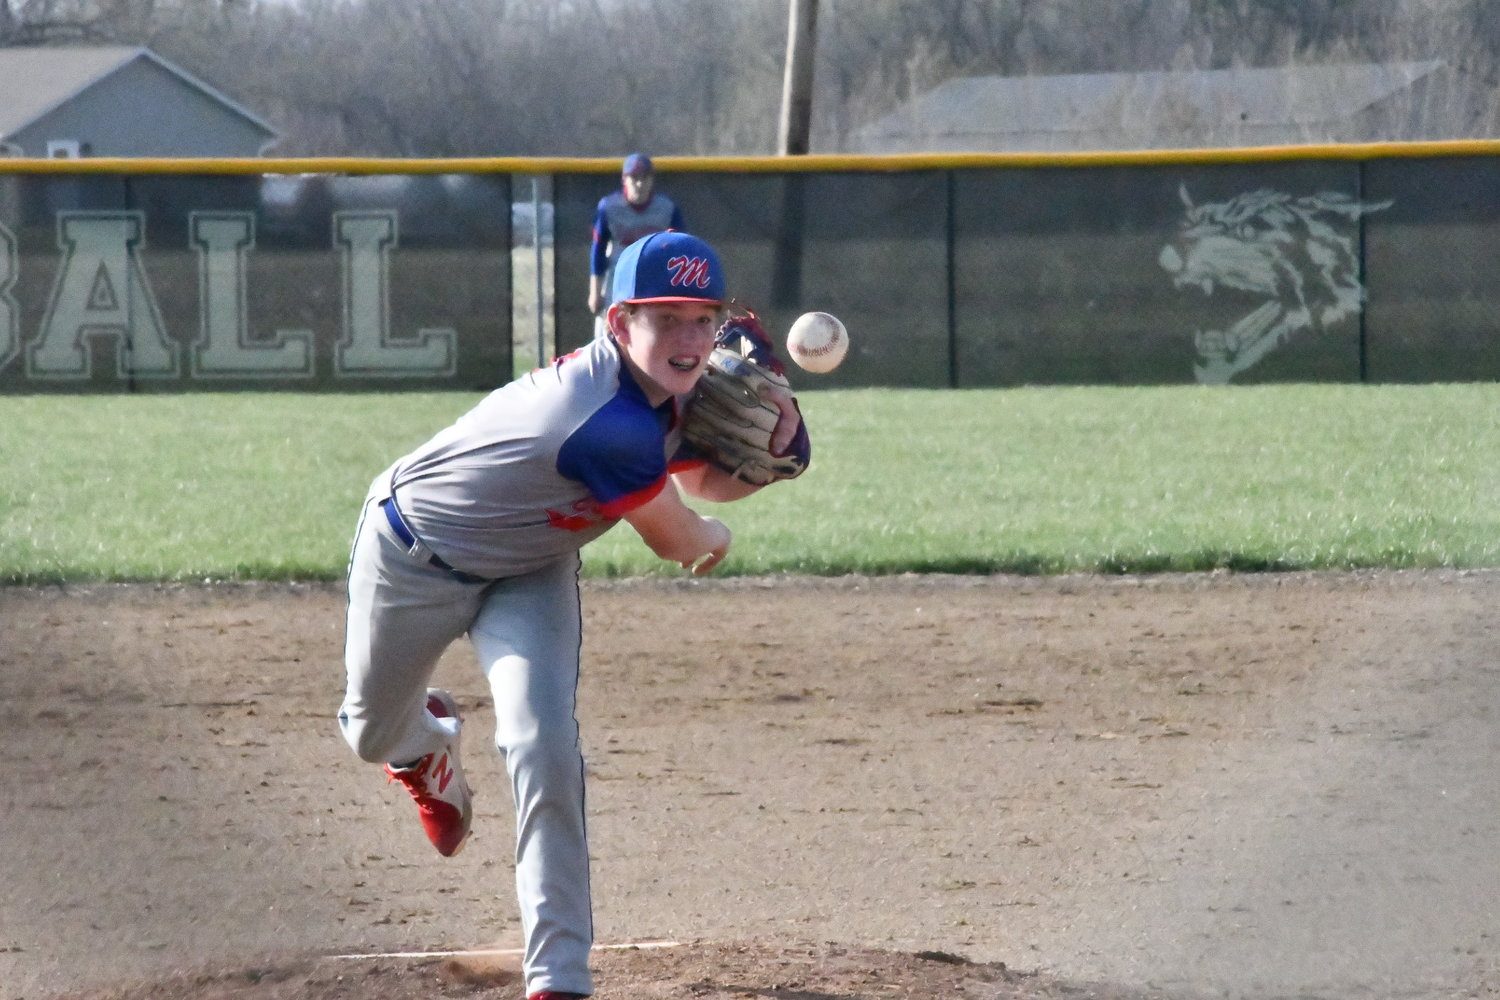 Moberly’s Jackson Engel deals toward home plate during Friday’s Randolph County game versus Cairo. Engel pitched a complete-game shutout as the Spartans downed the Bearcats, 1-0, in what turned into a ‘classic.’